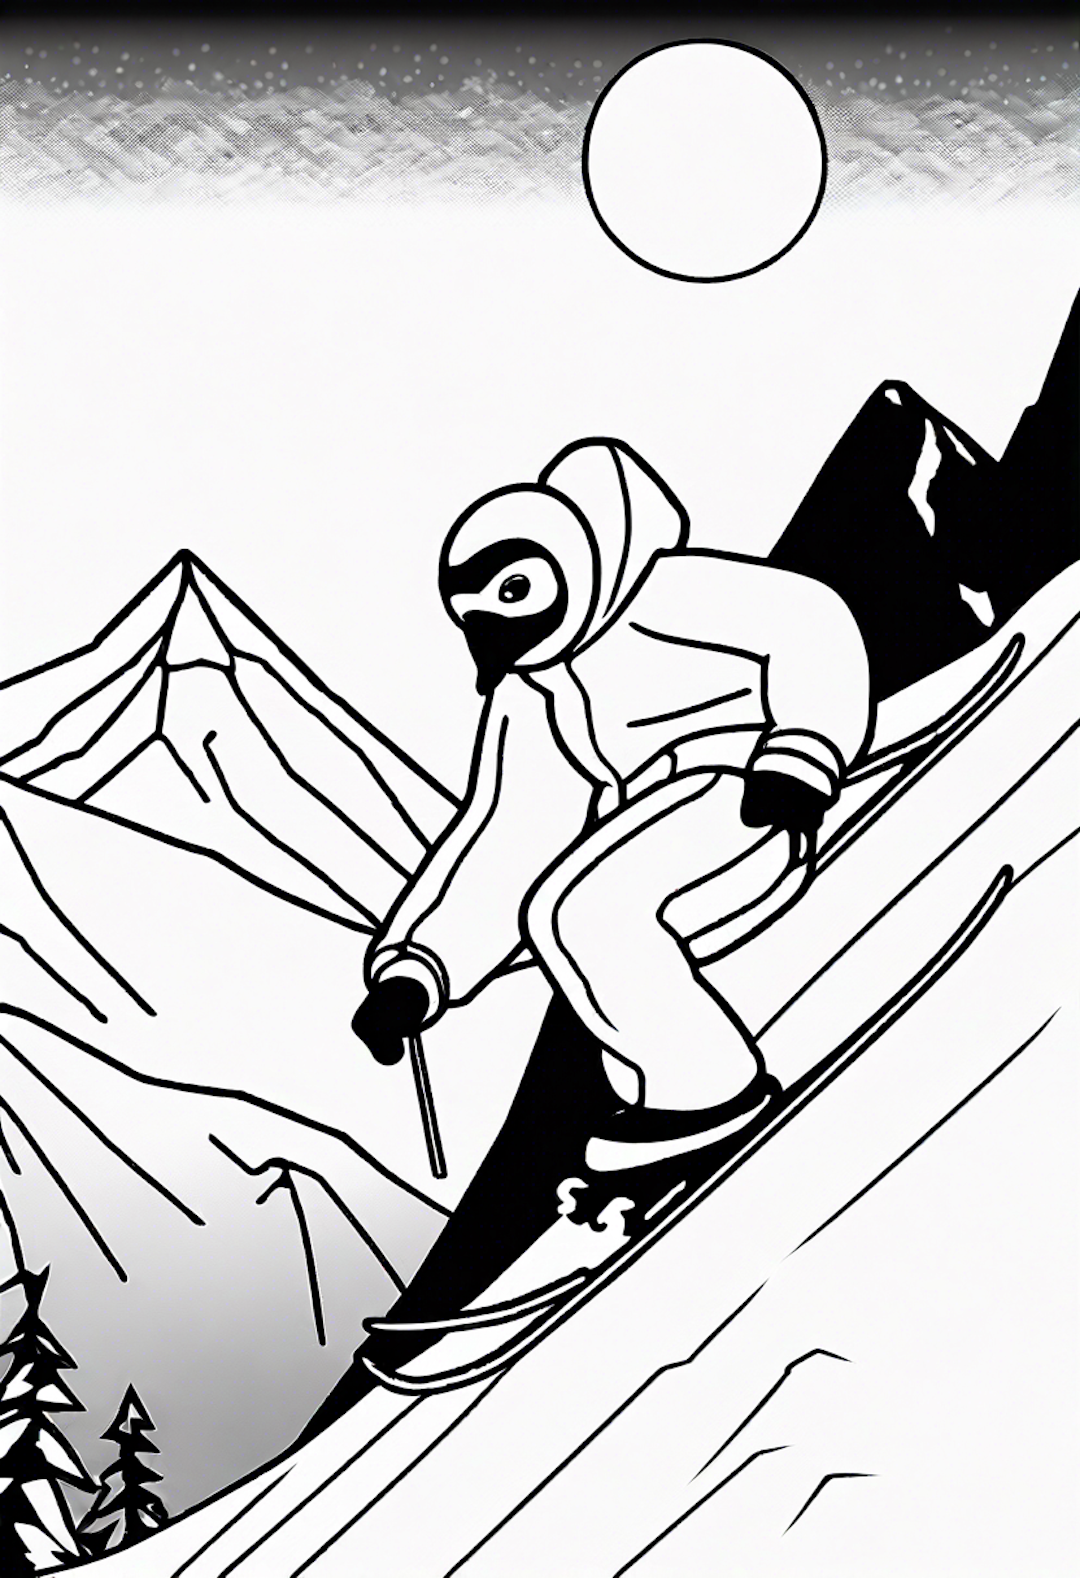 An Adventurous Star Skiing Down A Mountain With A Daring Penguin